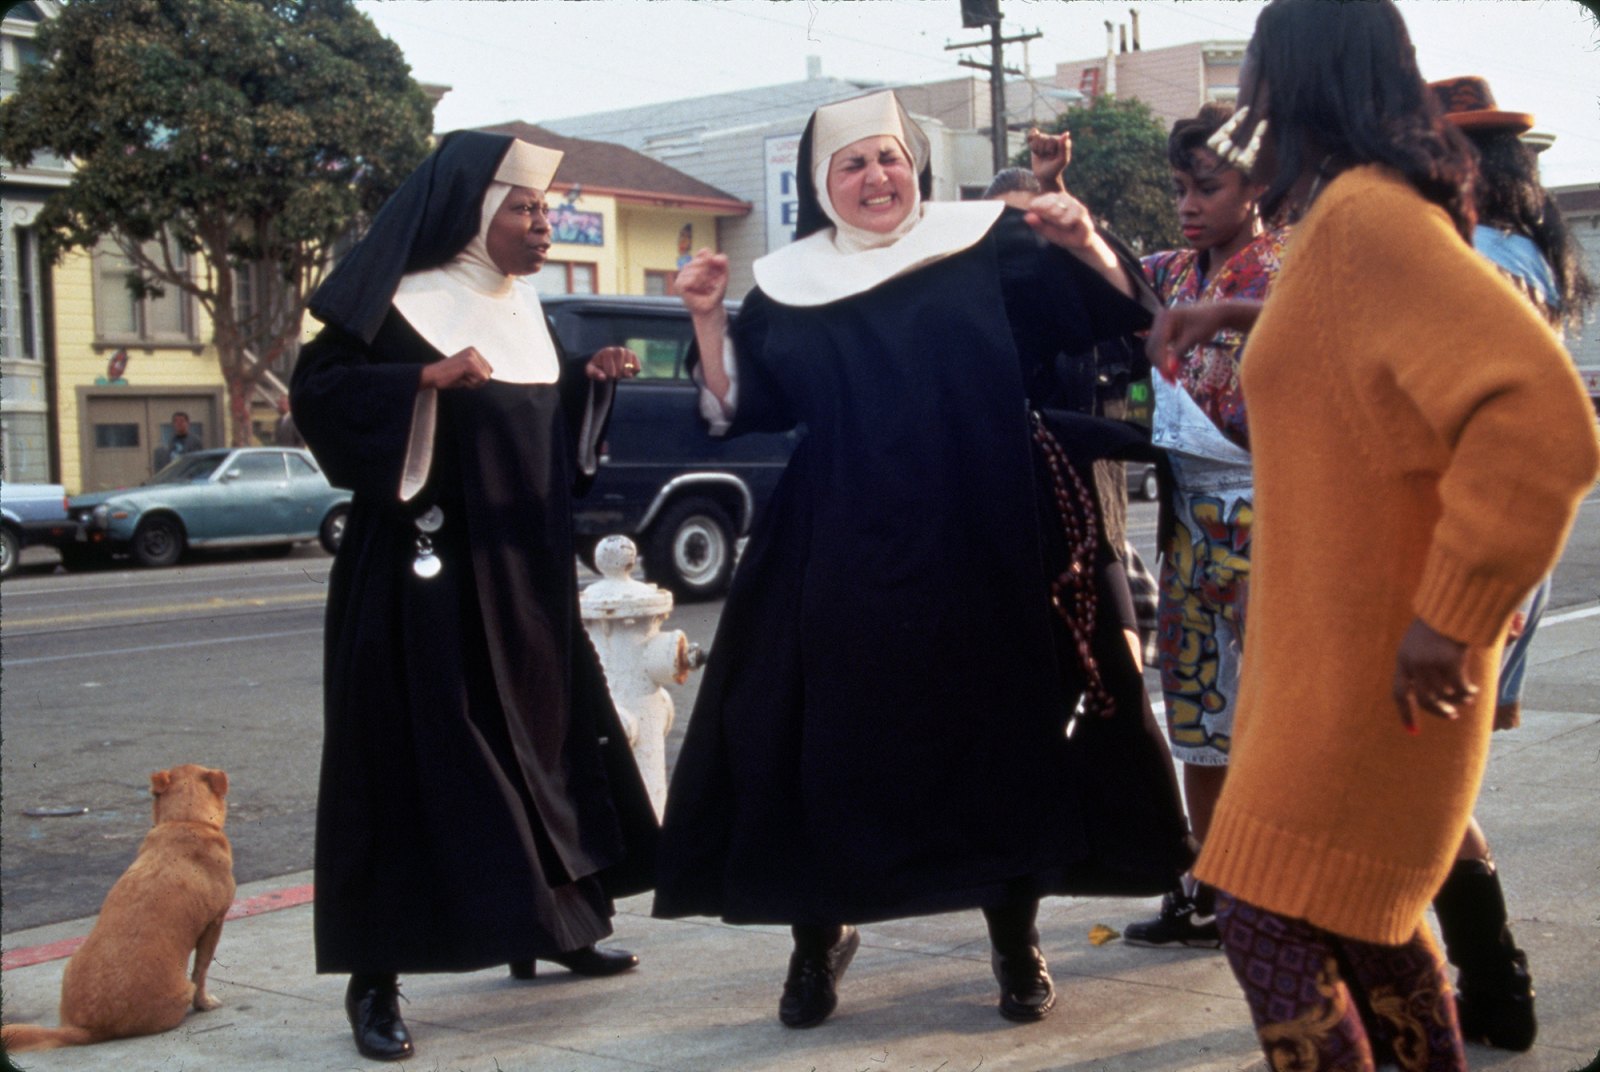 SISTER ACT Movies That Have Been Turned Into Broadway Musicals